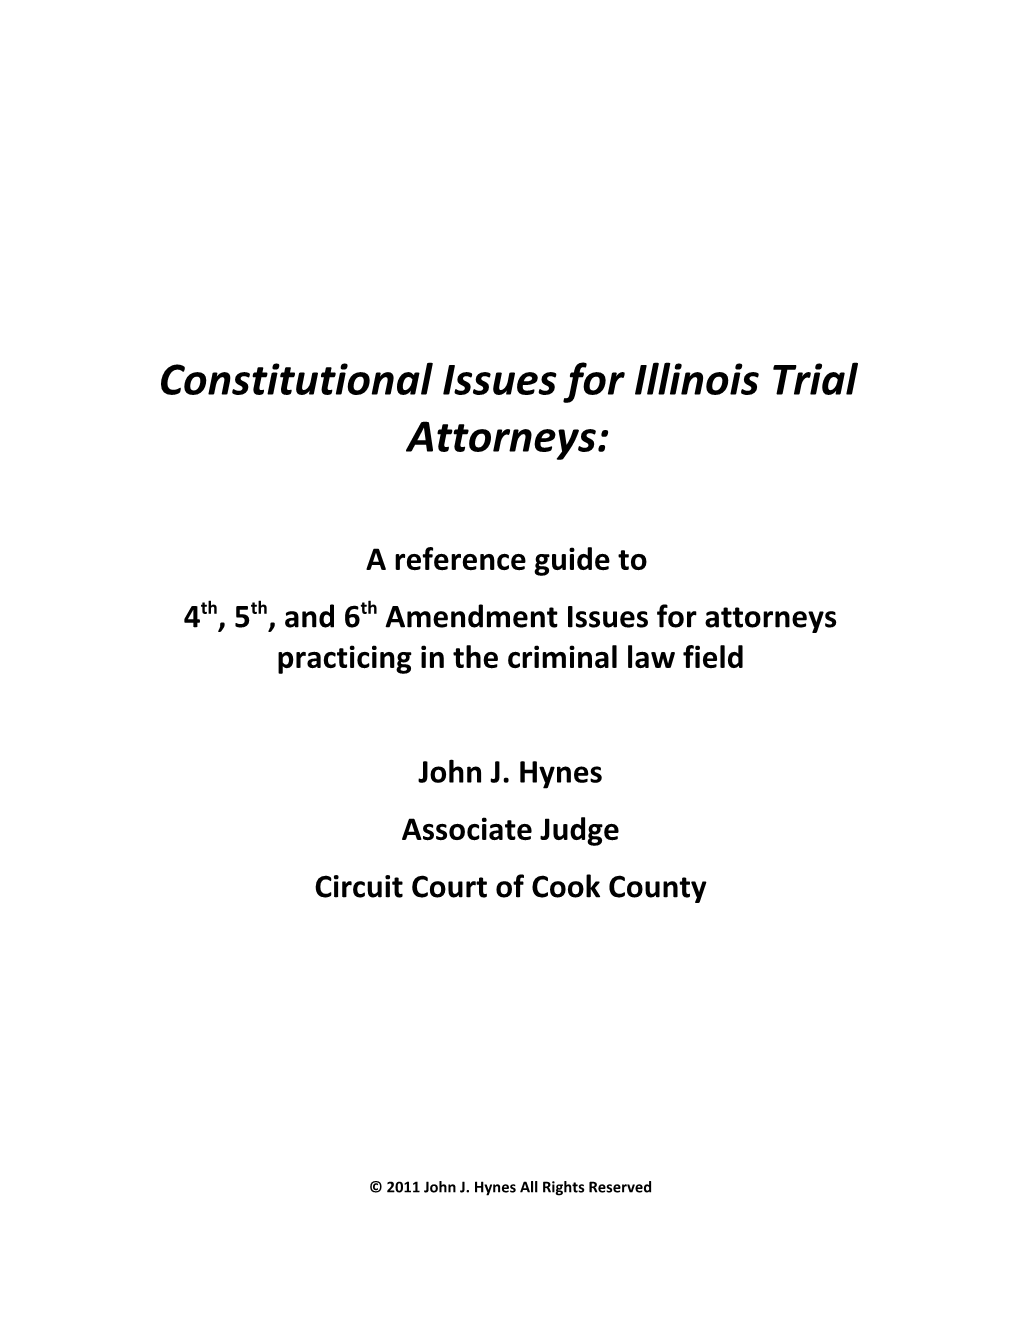 Constitutional Issues for Illinois Trial Attorneys